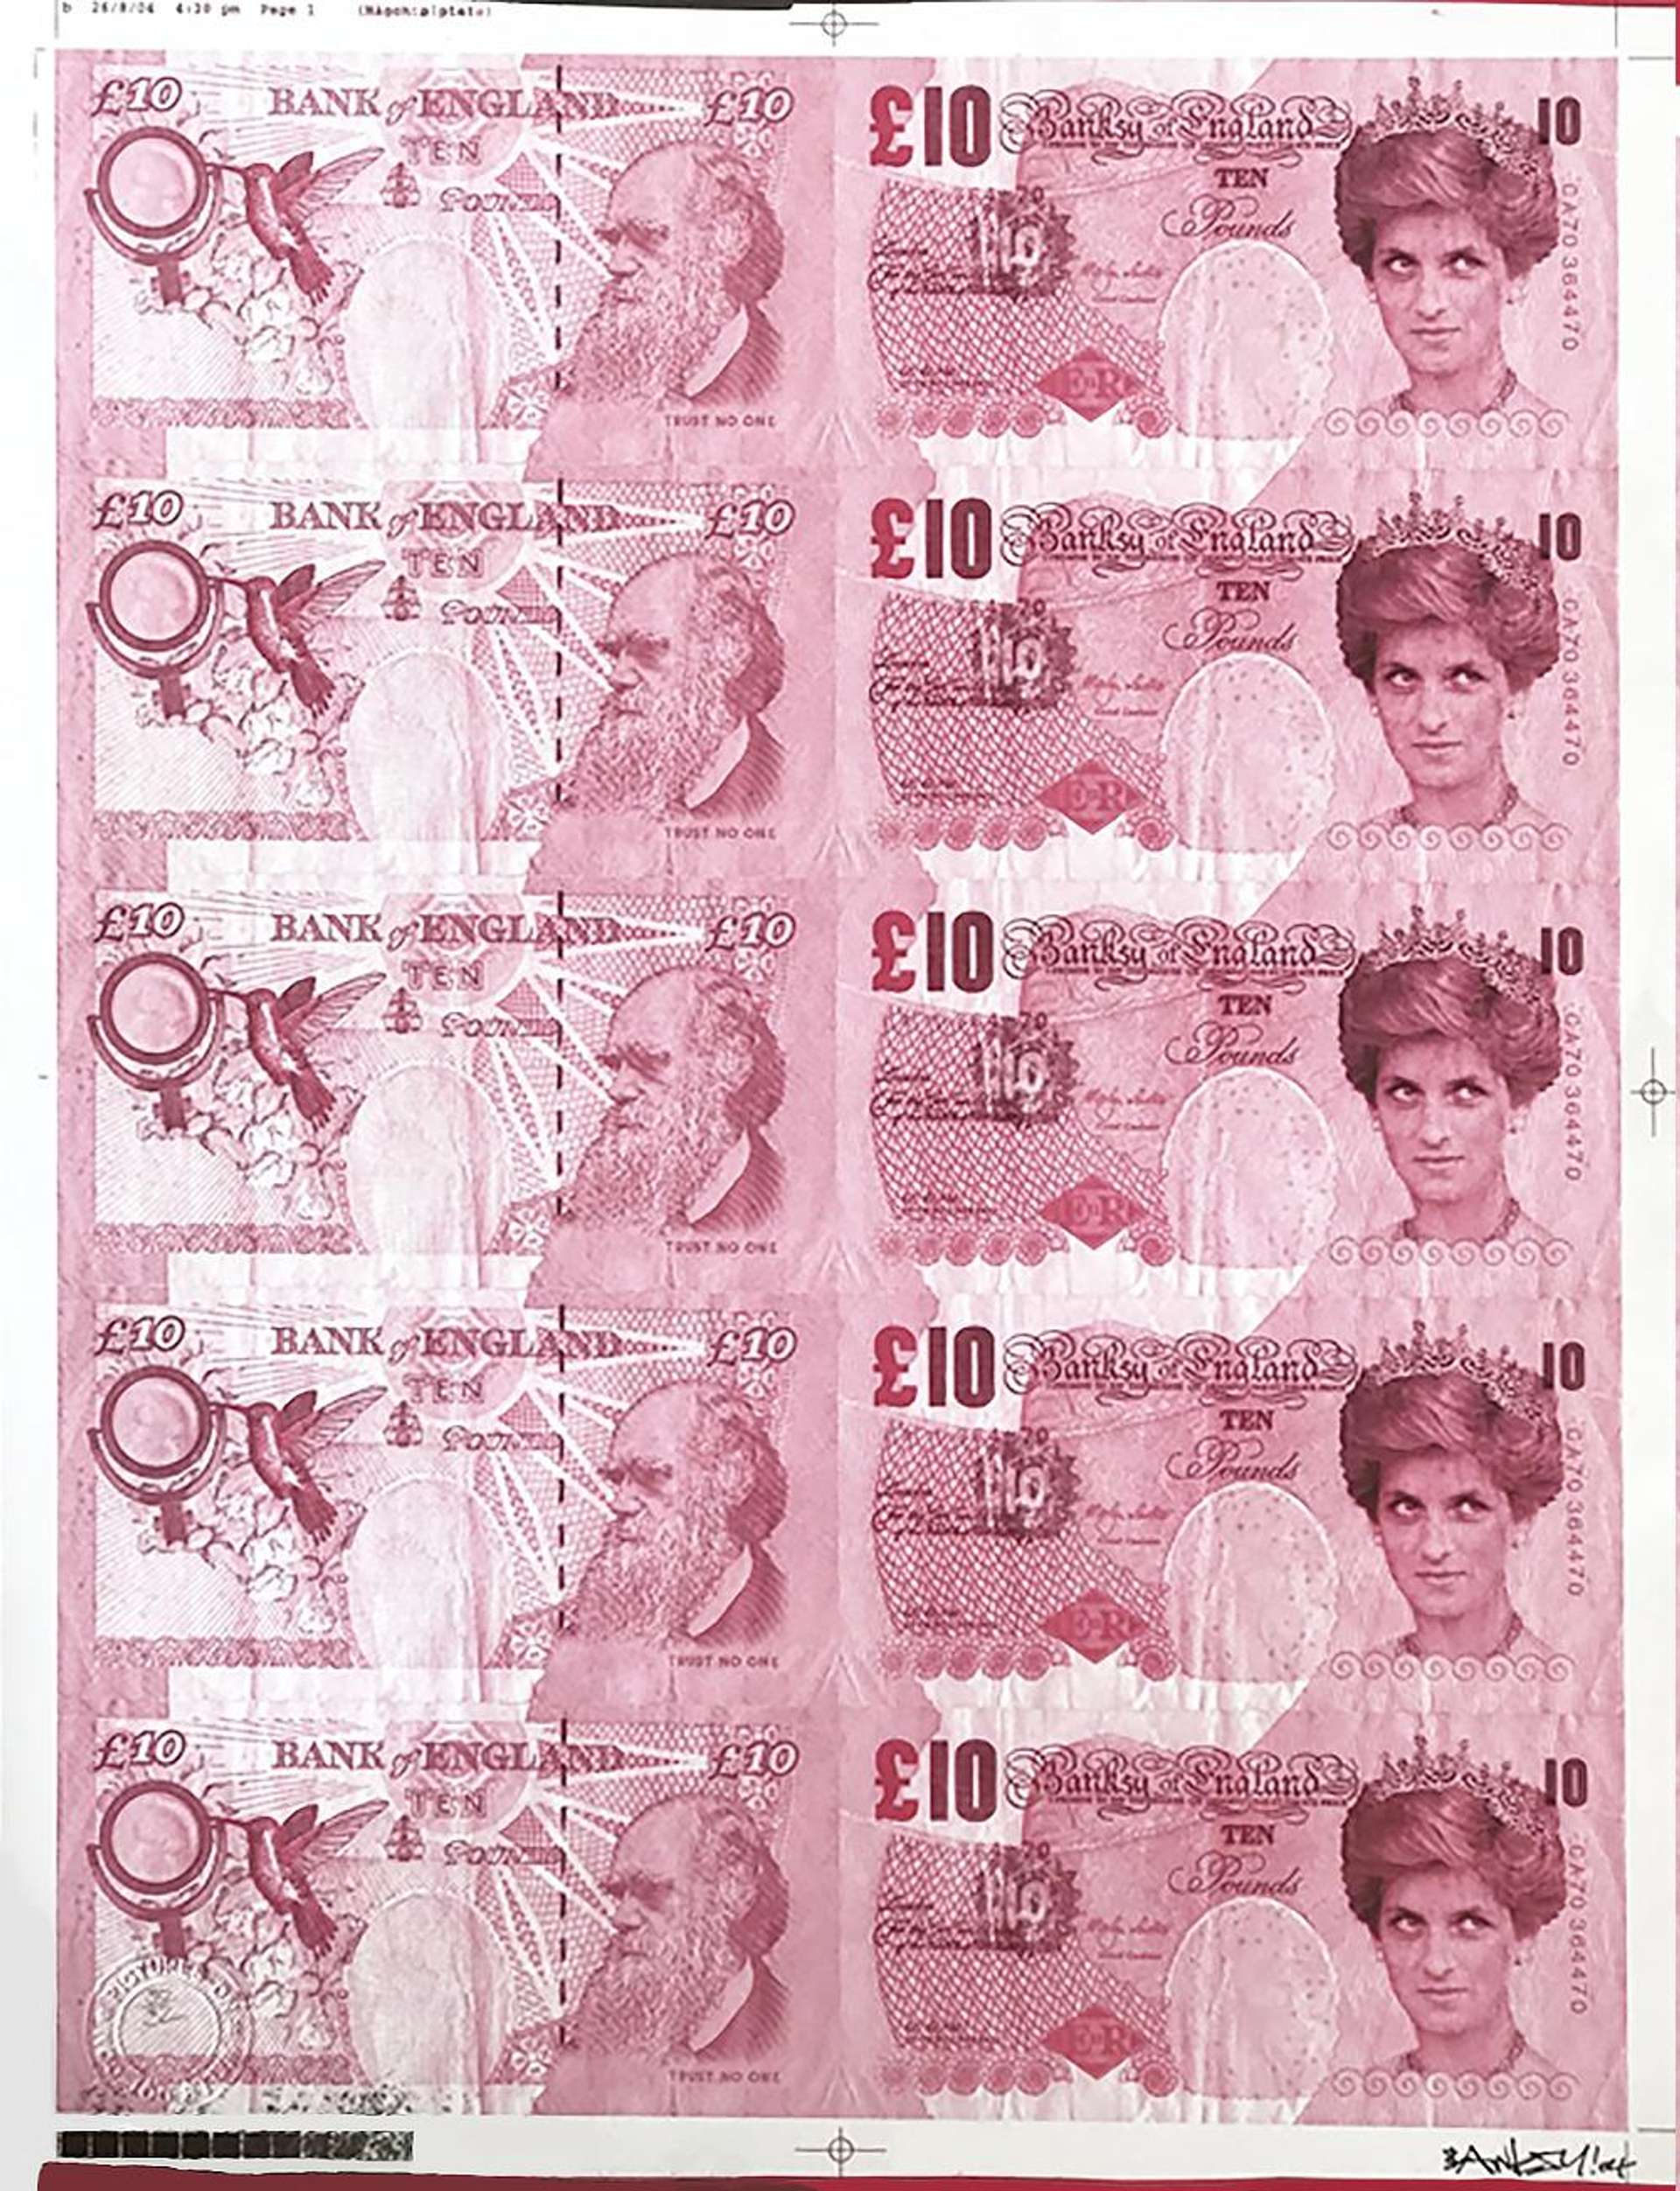 Di-Faced Tenners (Pink) - Signed Print by Banksy 2004 - MyArtBroker